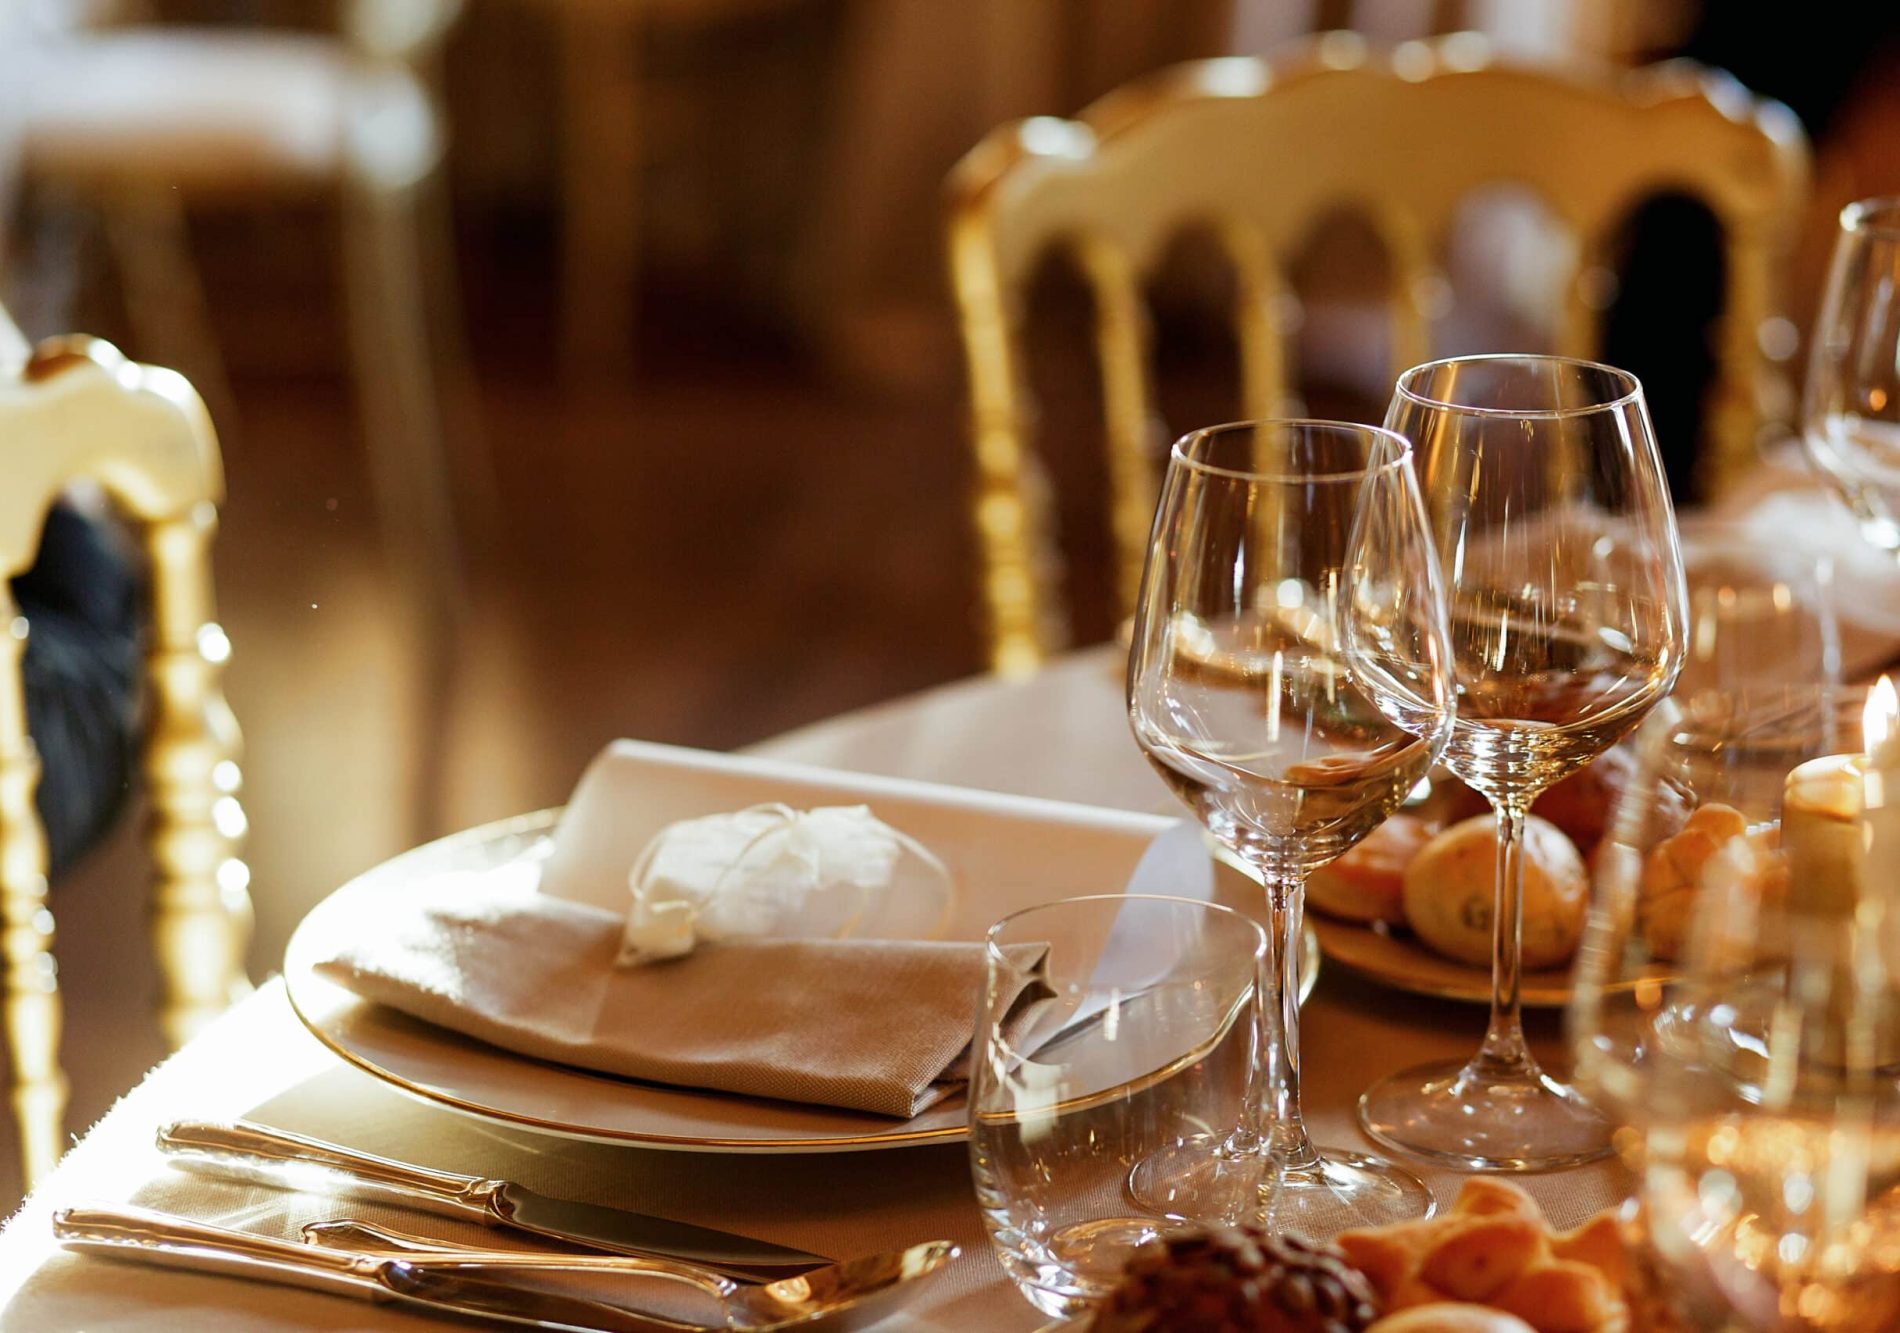 Close-up of shiny glassware standing behind dinner plate